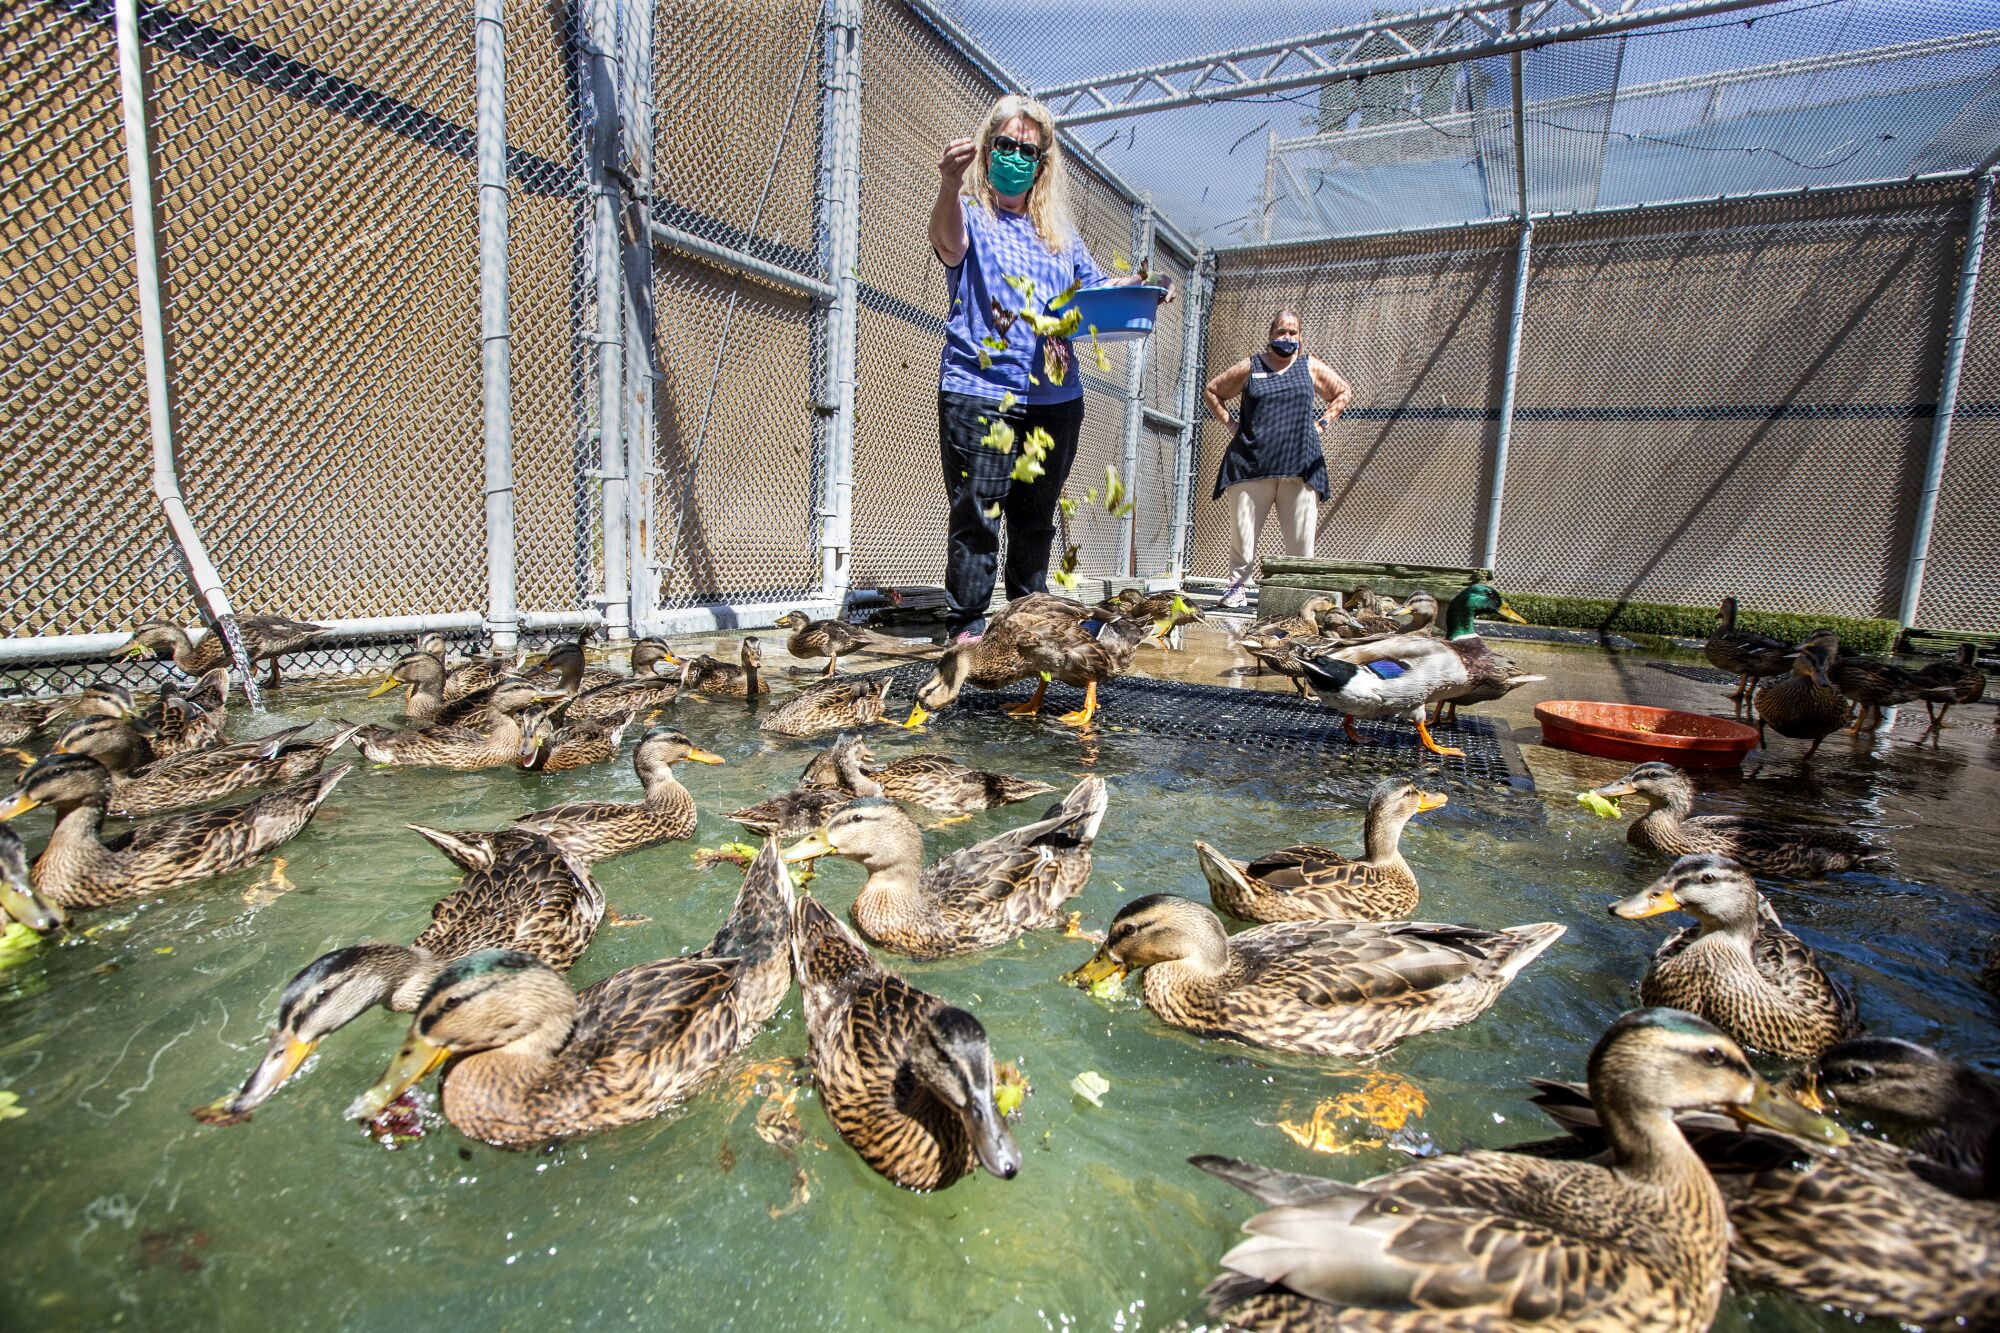 Debbie Wayns feeds donated lettuce to ducks in a pool at the center